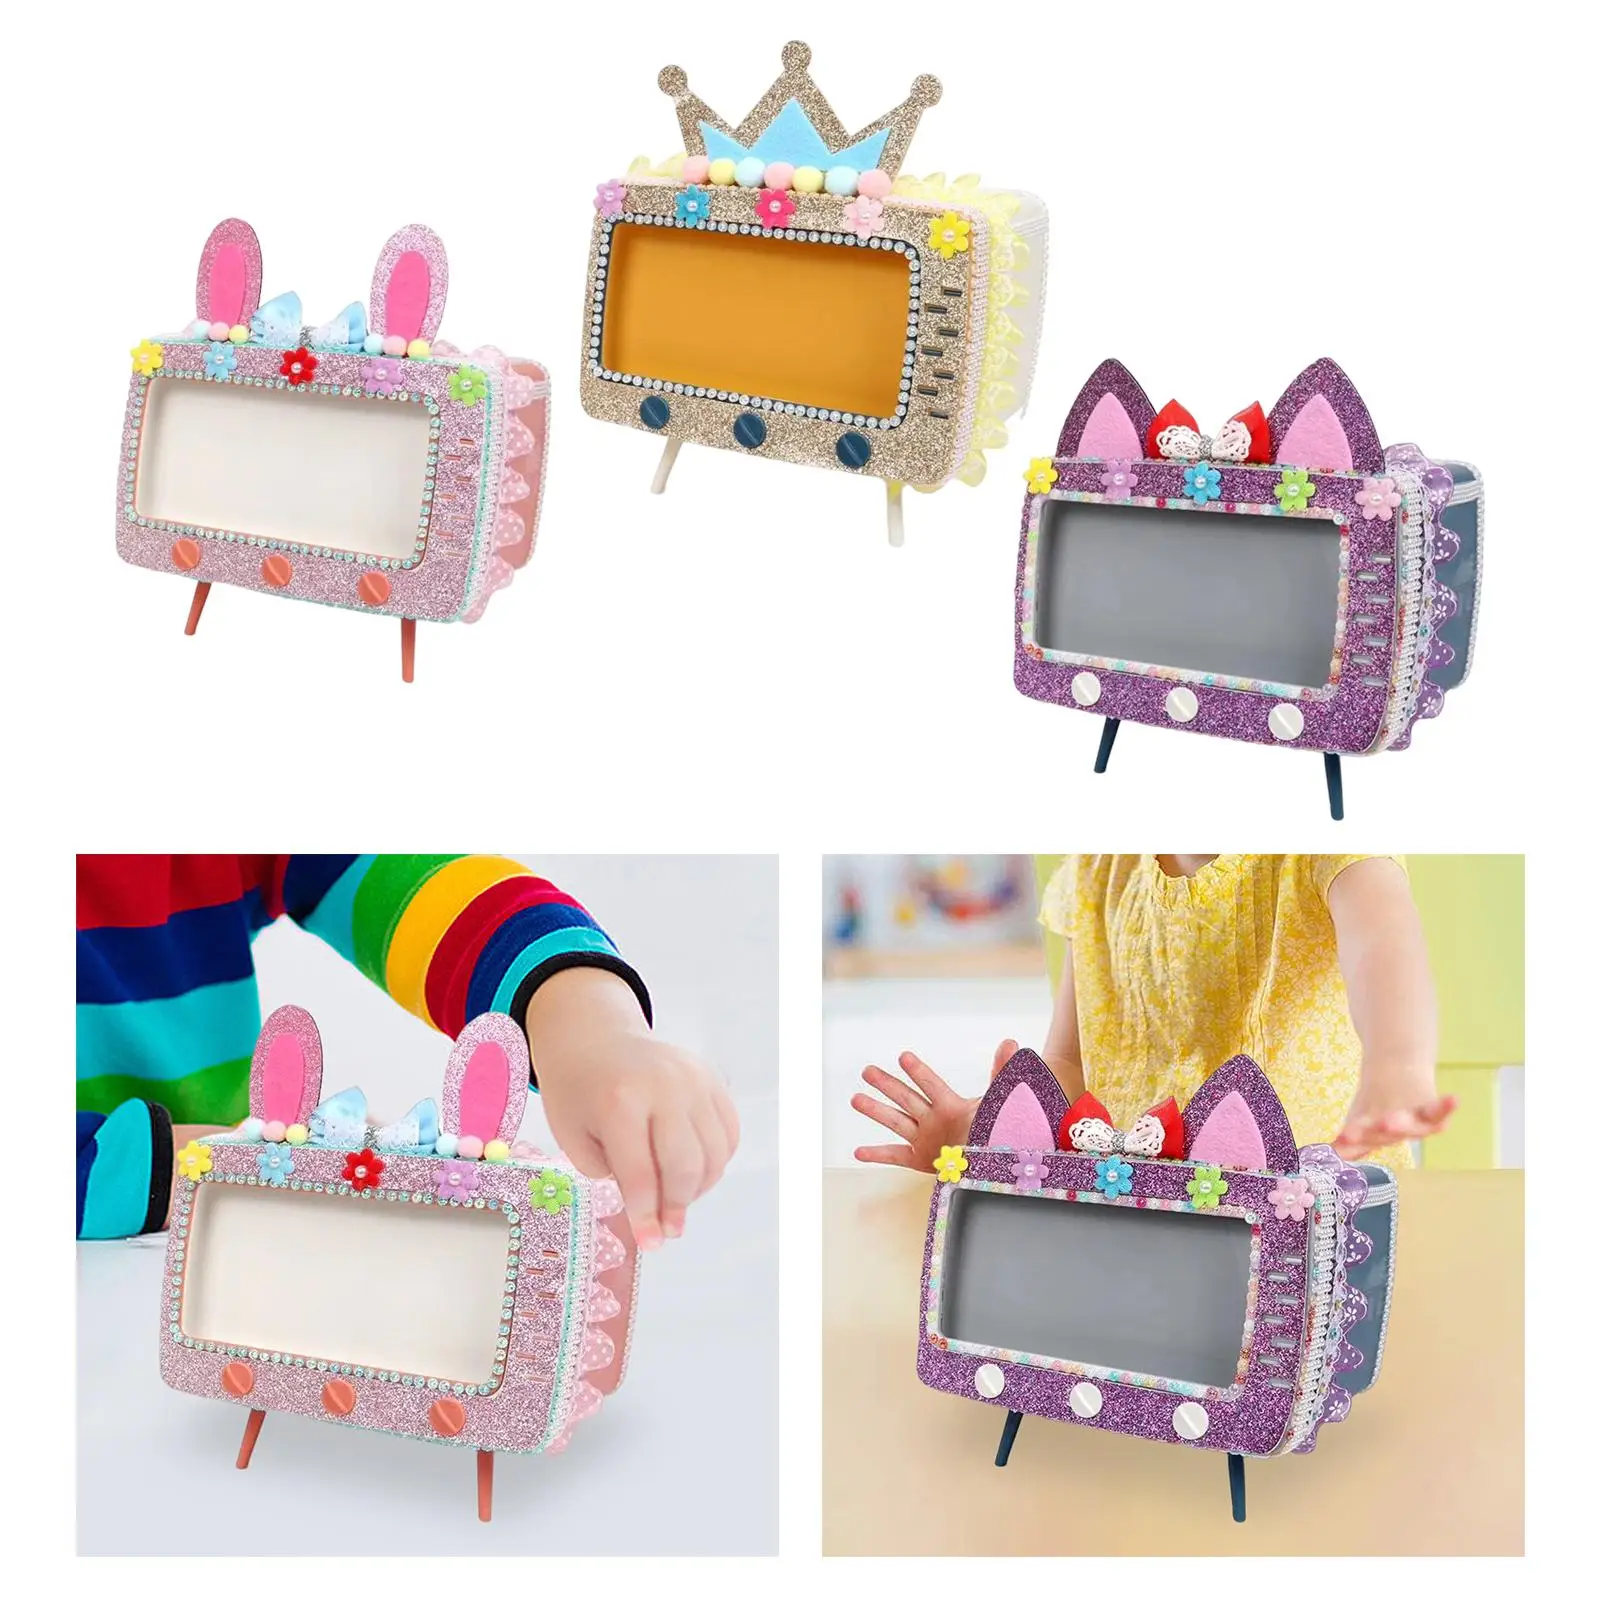 TV Shaped Tissue Box DIY with Phone Holder Paper Box Accessories Handmade